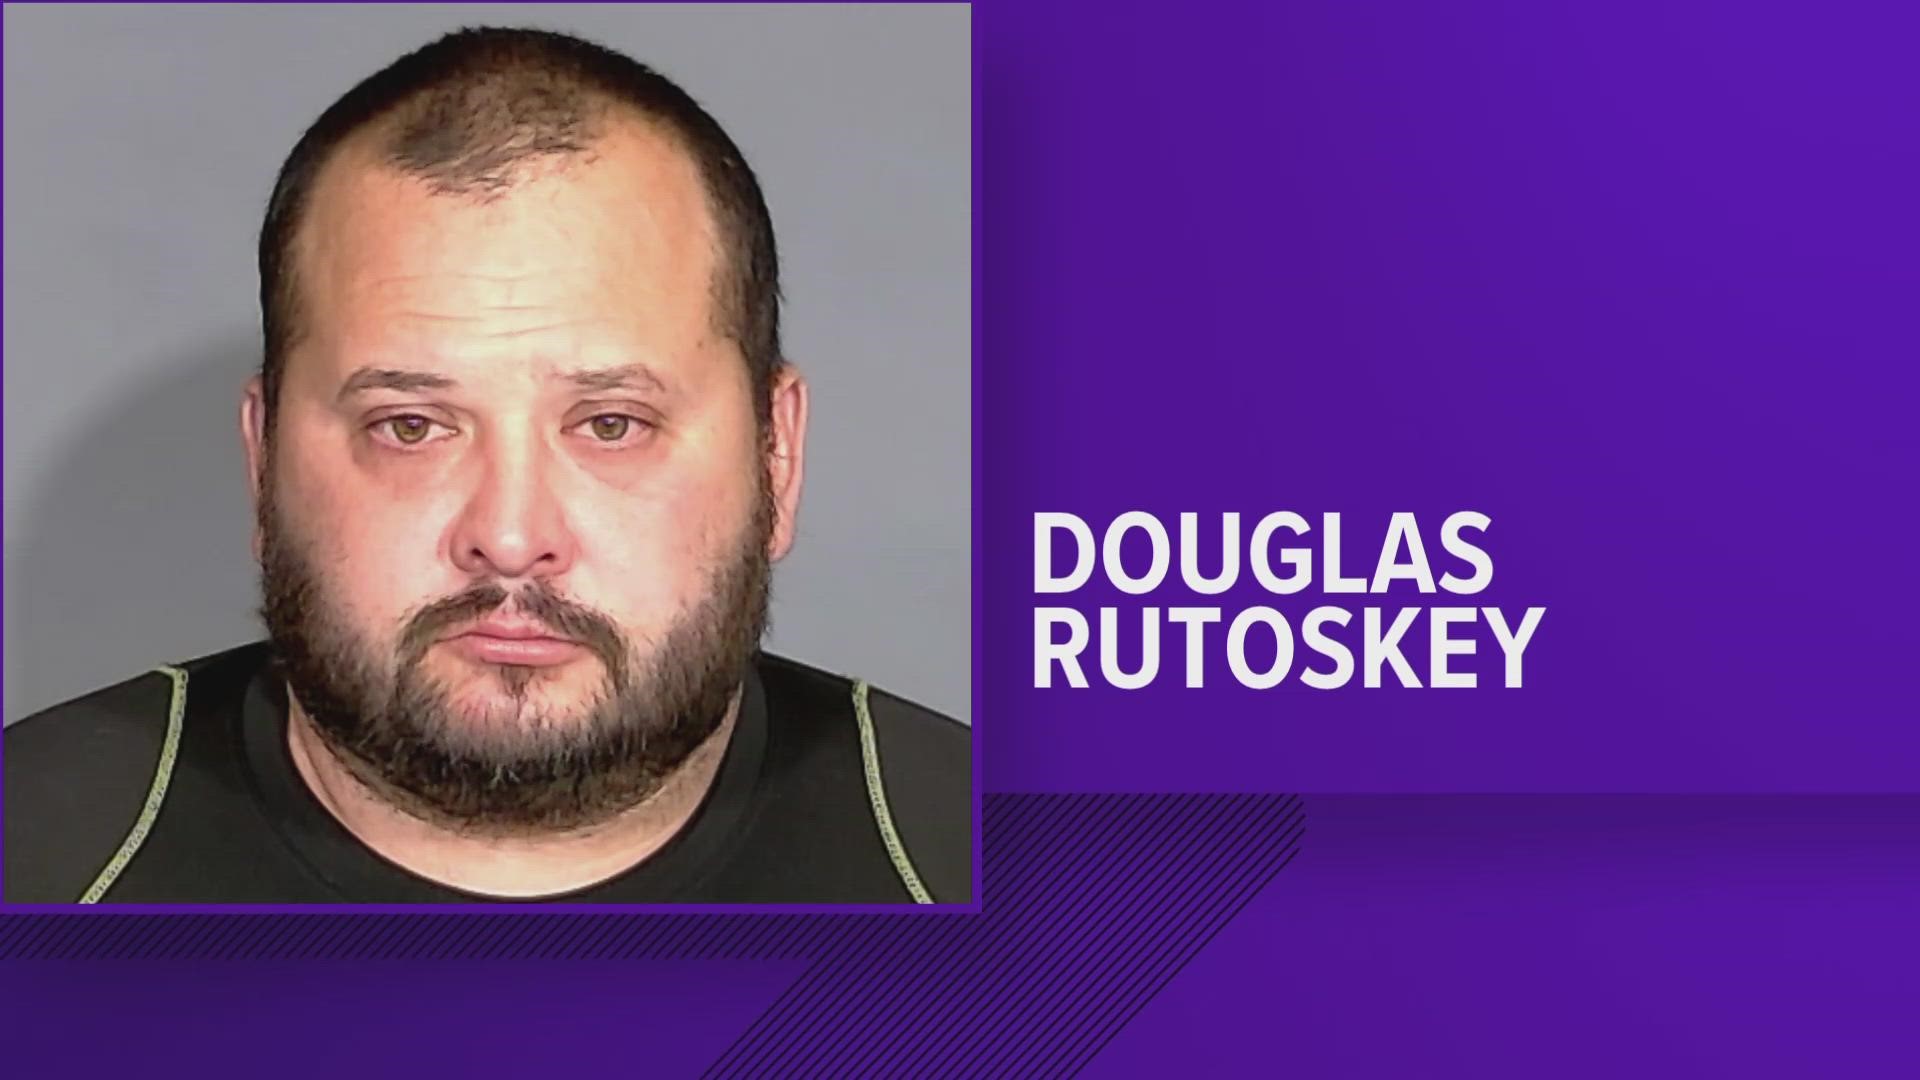 Douglas Rutoskey is now without a license and is on probation after being arrested in November. He took off after he hit another car.